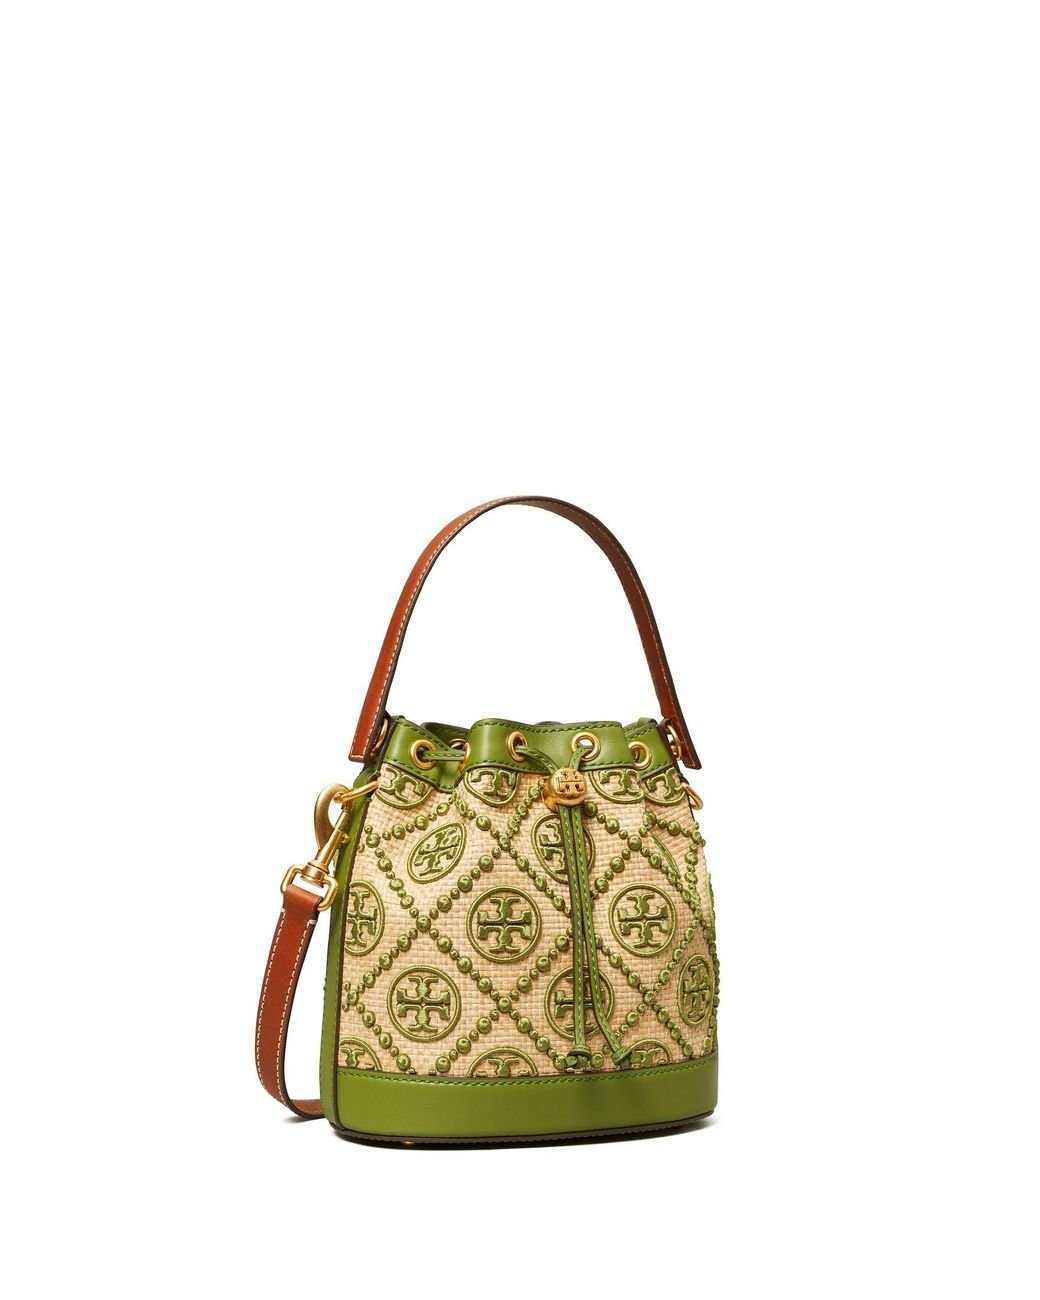 Women's Loewe Beach bag tote and straw bags from C$819